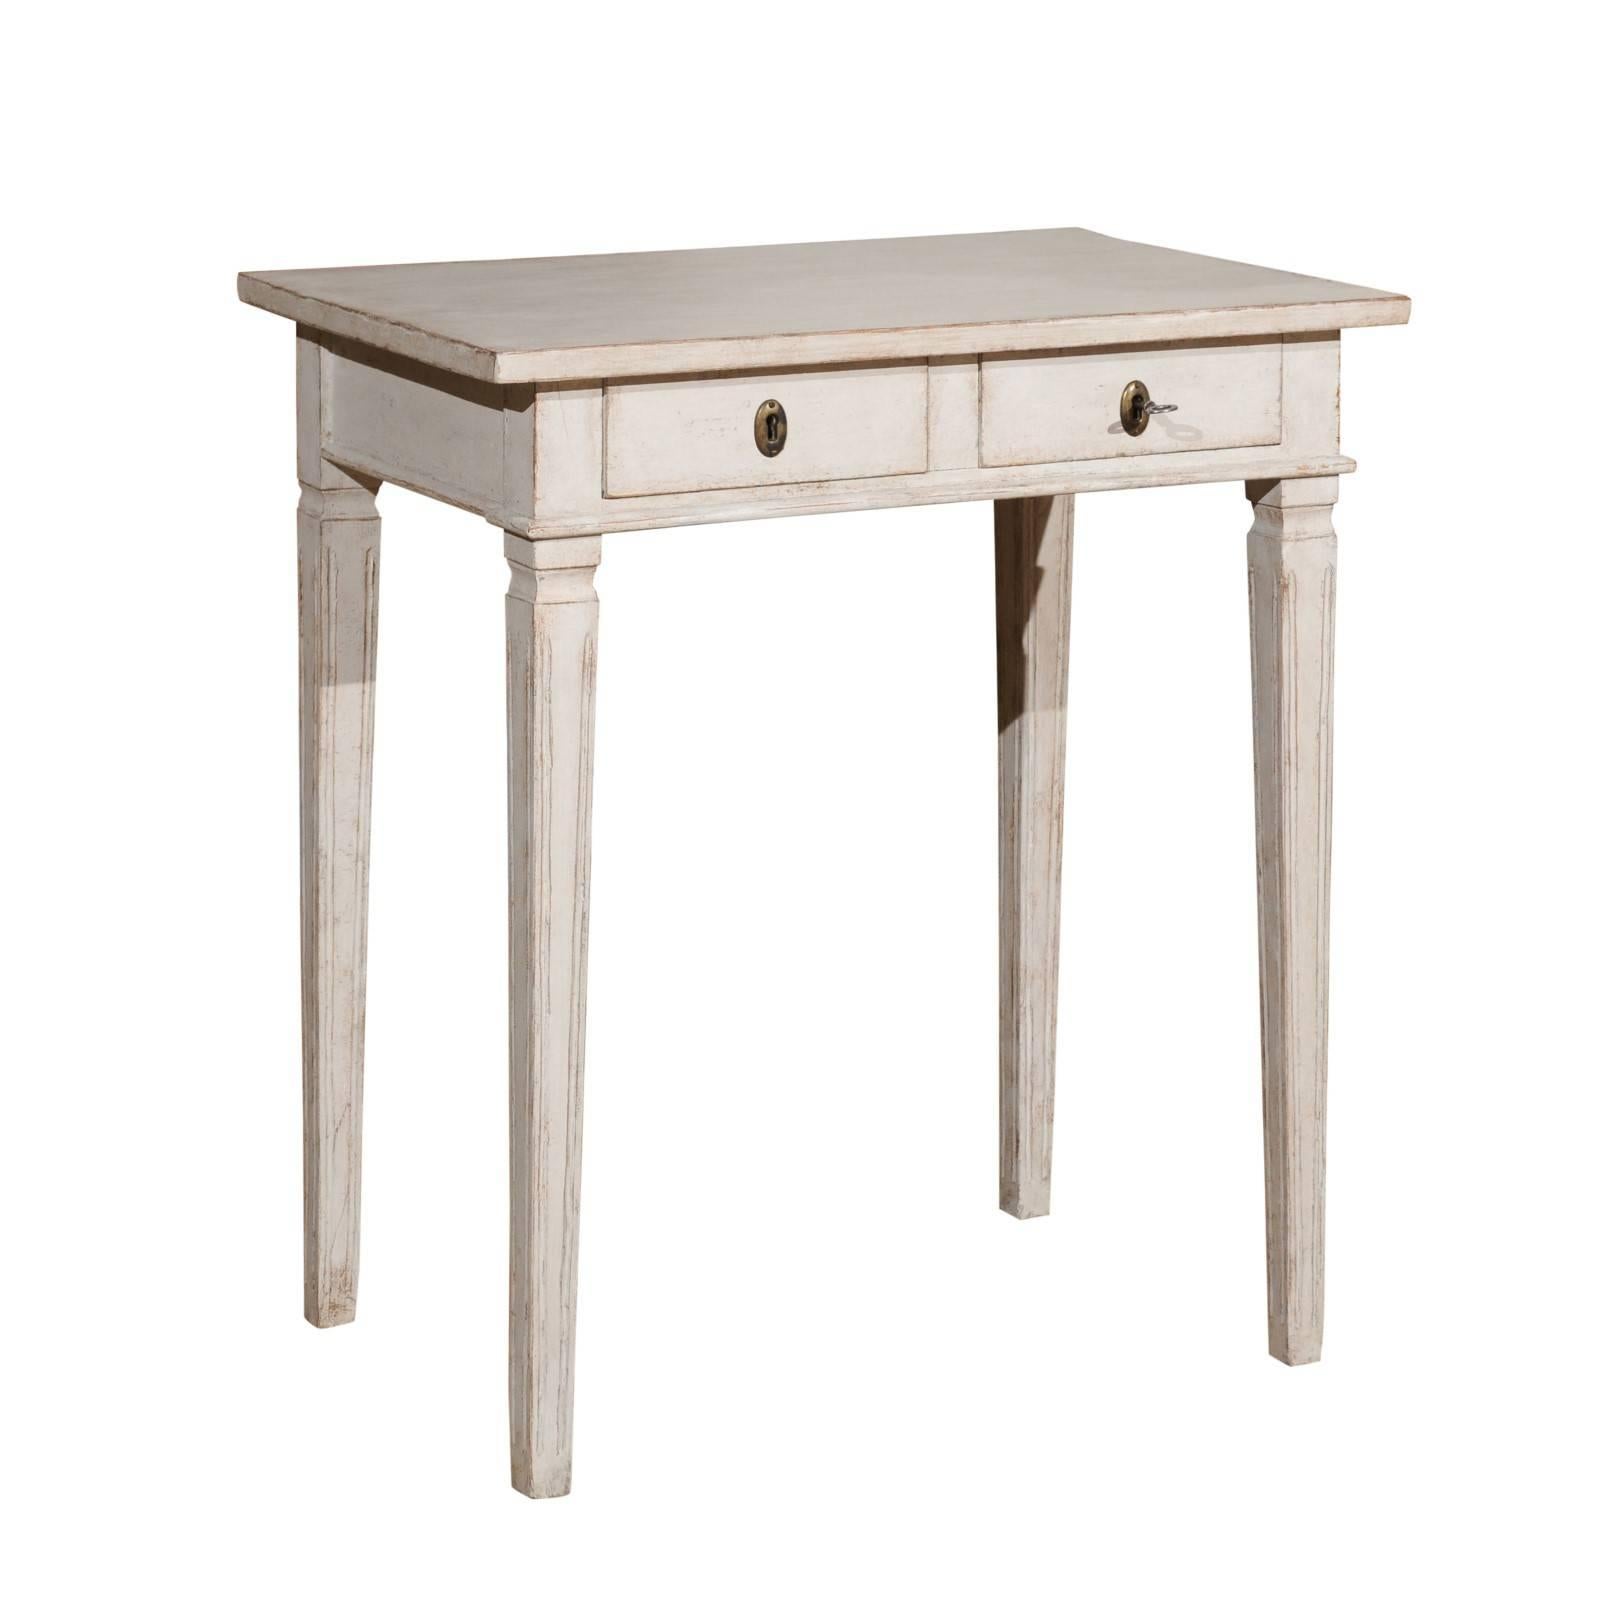 Swedish 1860s Gustavian Style Painted Side Table with Drawers and Tapered Legs